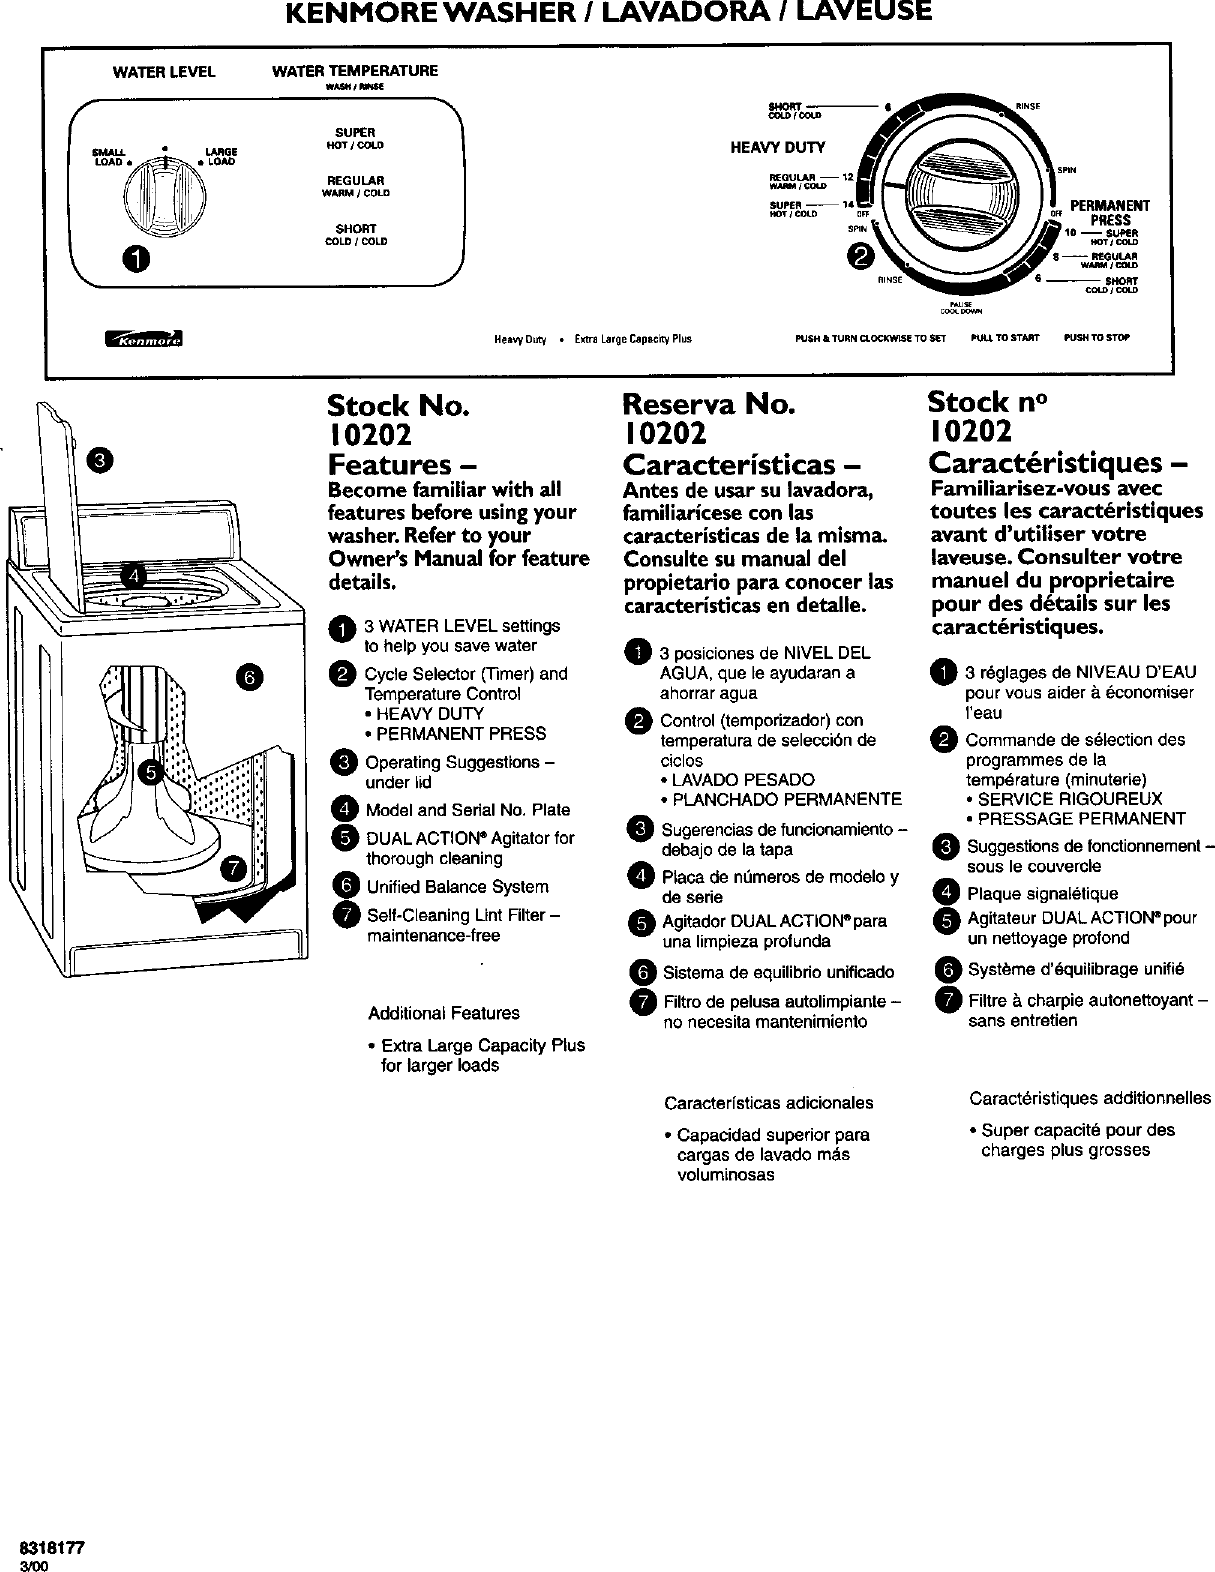 Page 1 of 1 - KENMORE  Residential Washers Manual L0050206